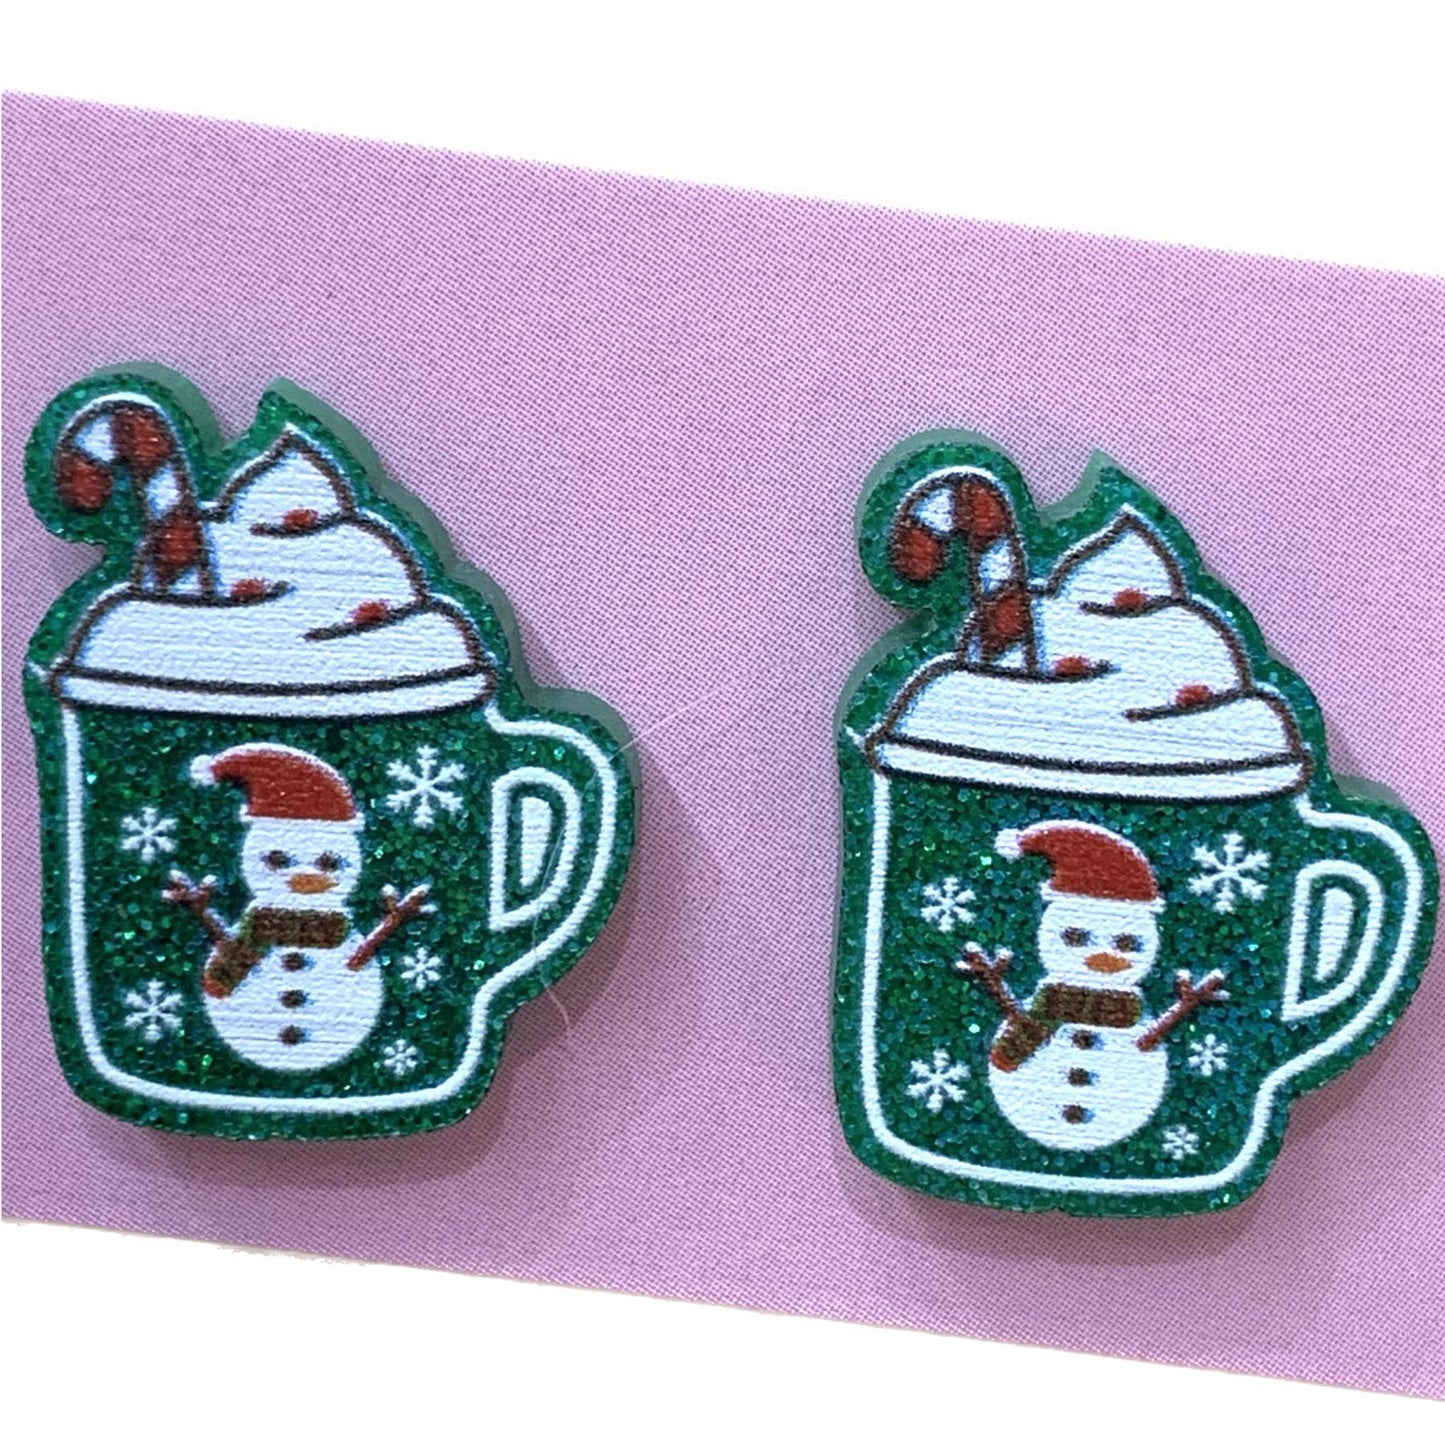 MAKIN' WHOOPEE - "Cup of Cheer" STUDS